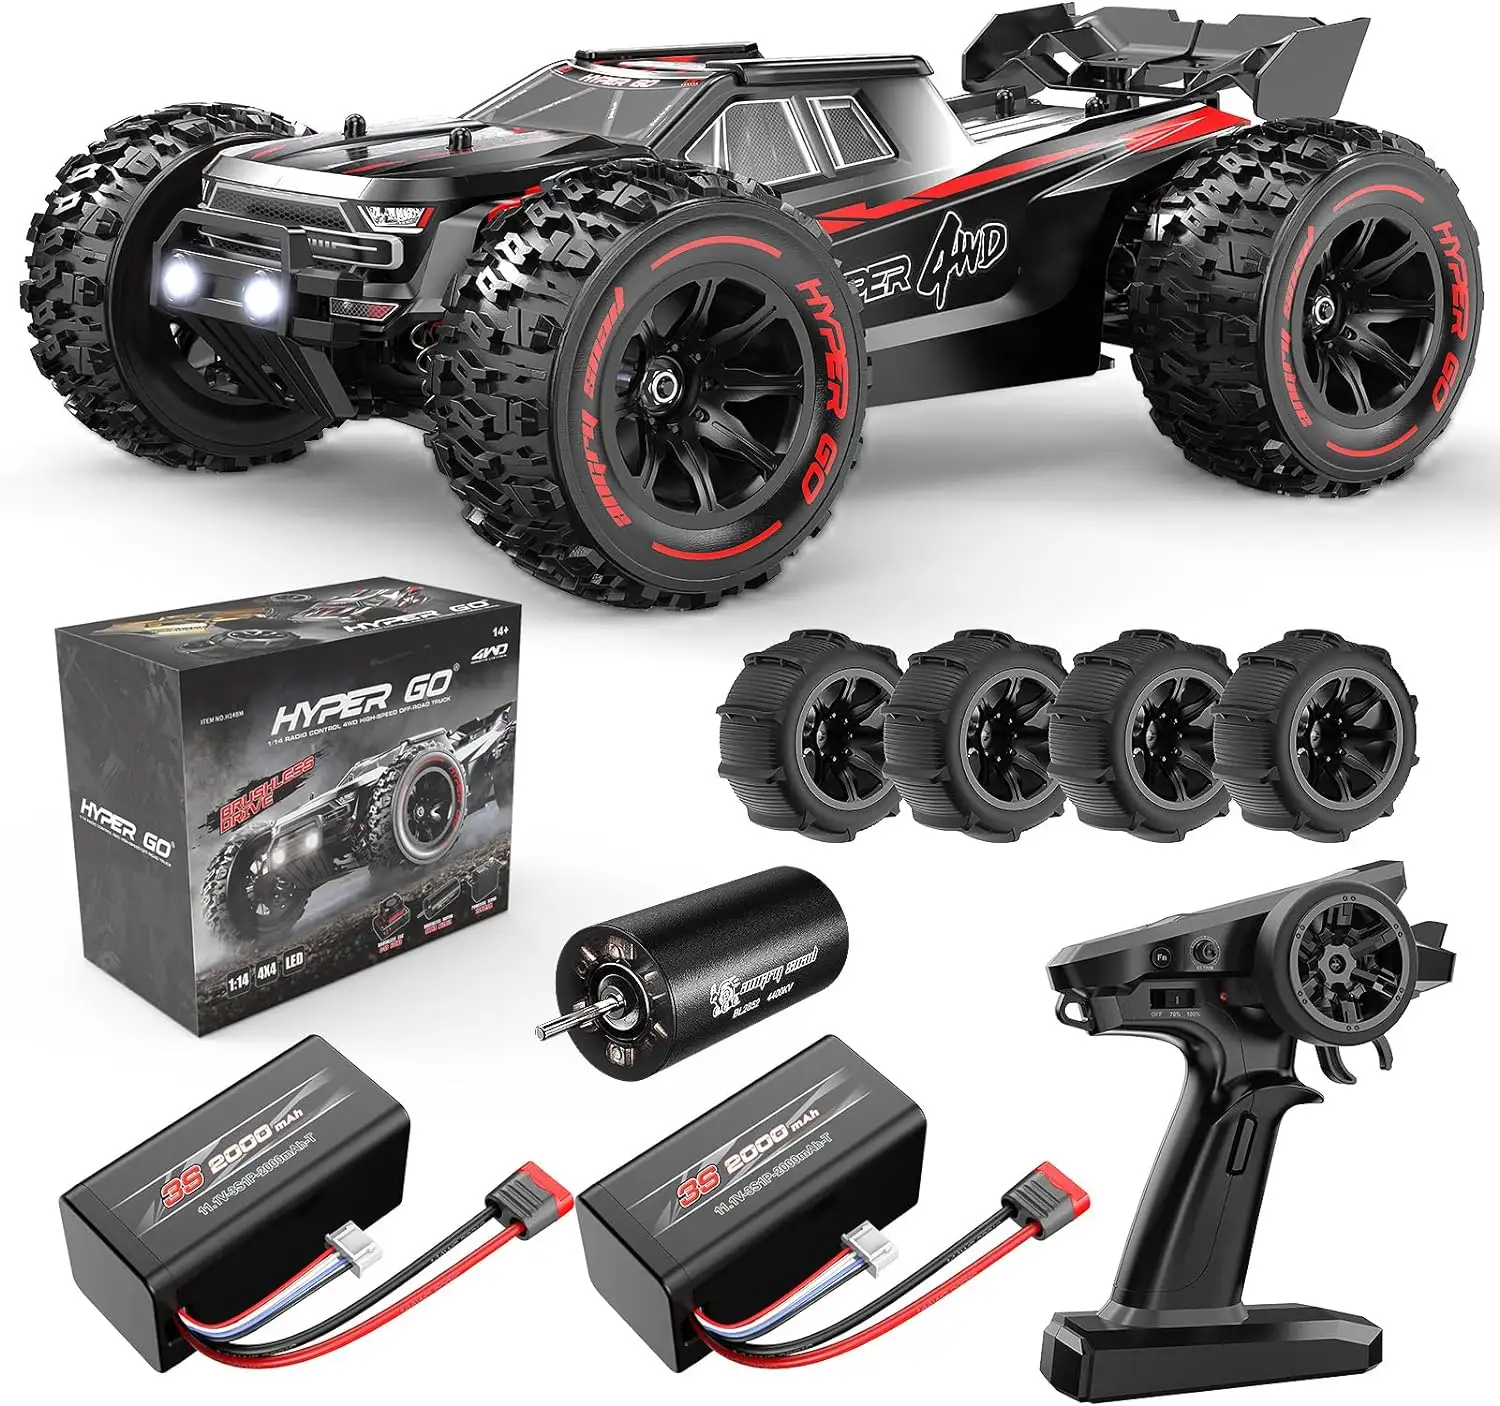 DWI Dowellin HYPER GO H14210 1/14 Brushless RC Cars for Adults RC Trucks 4wd Offroad Waterproof,High Speed RC Car